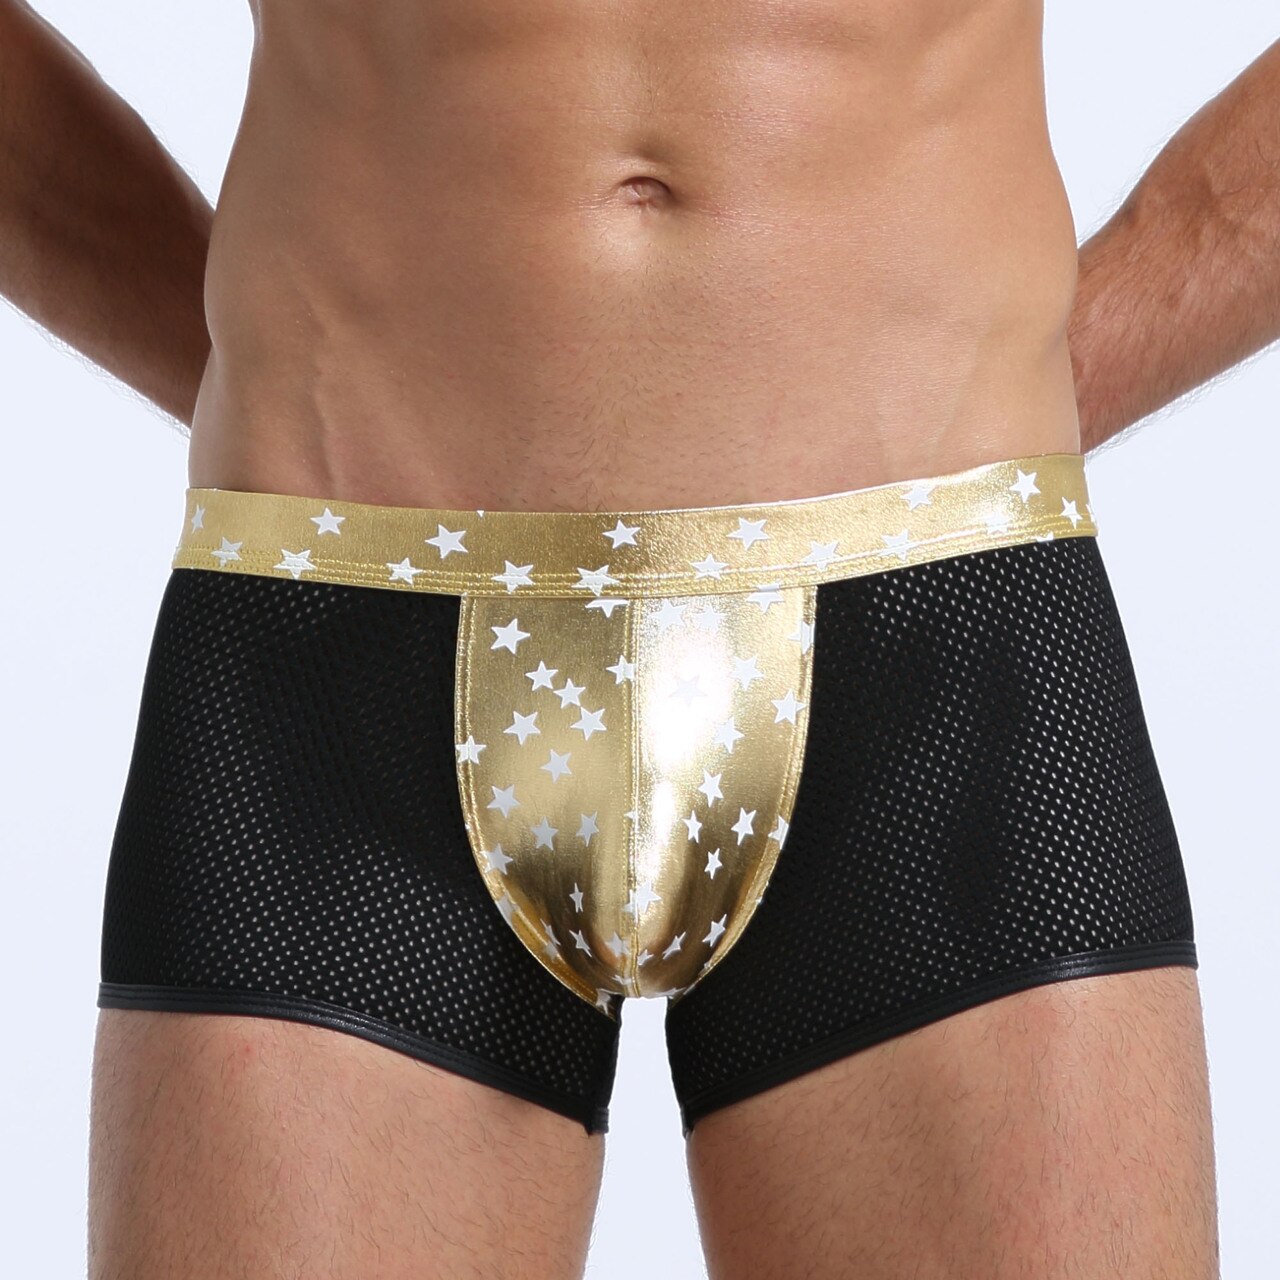 SALE - Mens Super Stars Shiny Metallic and Net Boxer Shorts Gold and Black